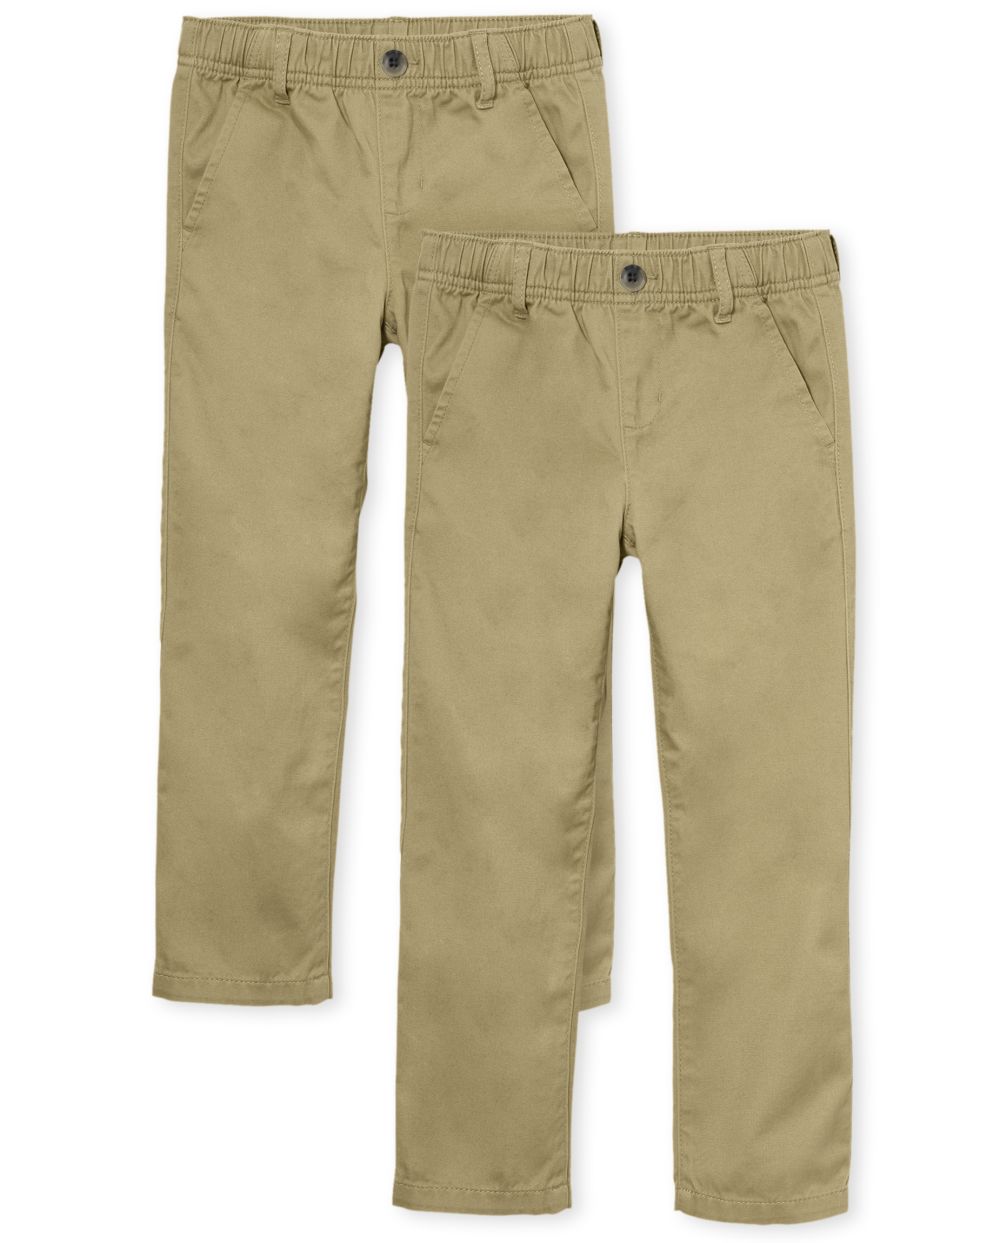 The Children's Place Boys Uniform Stretch Pull On Straight Chino Pants 2-Pack | Size 10H | Tan | Cotton/Spandex